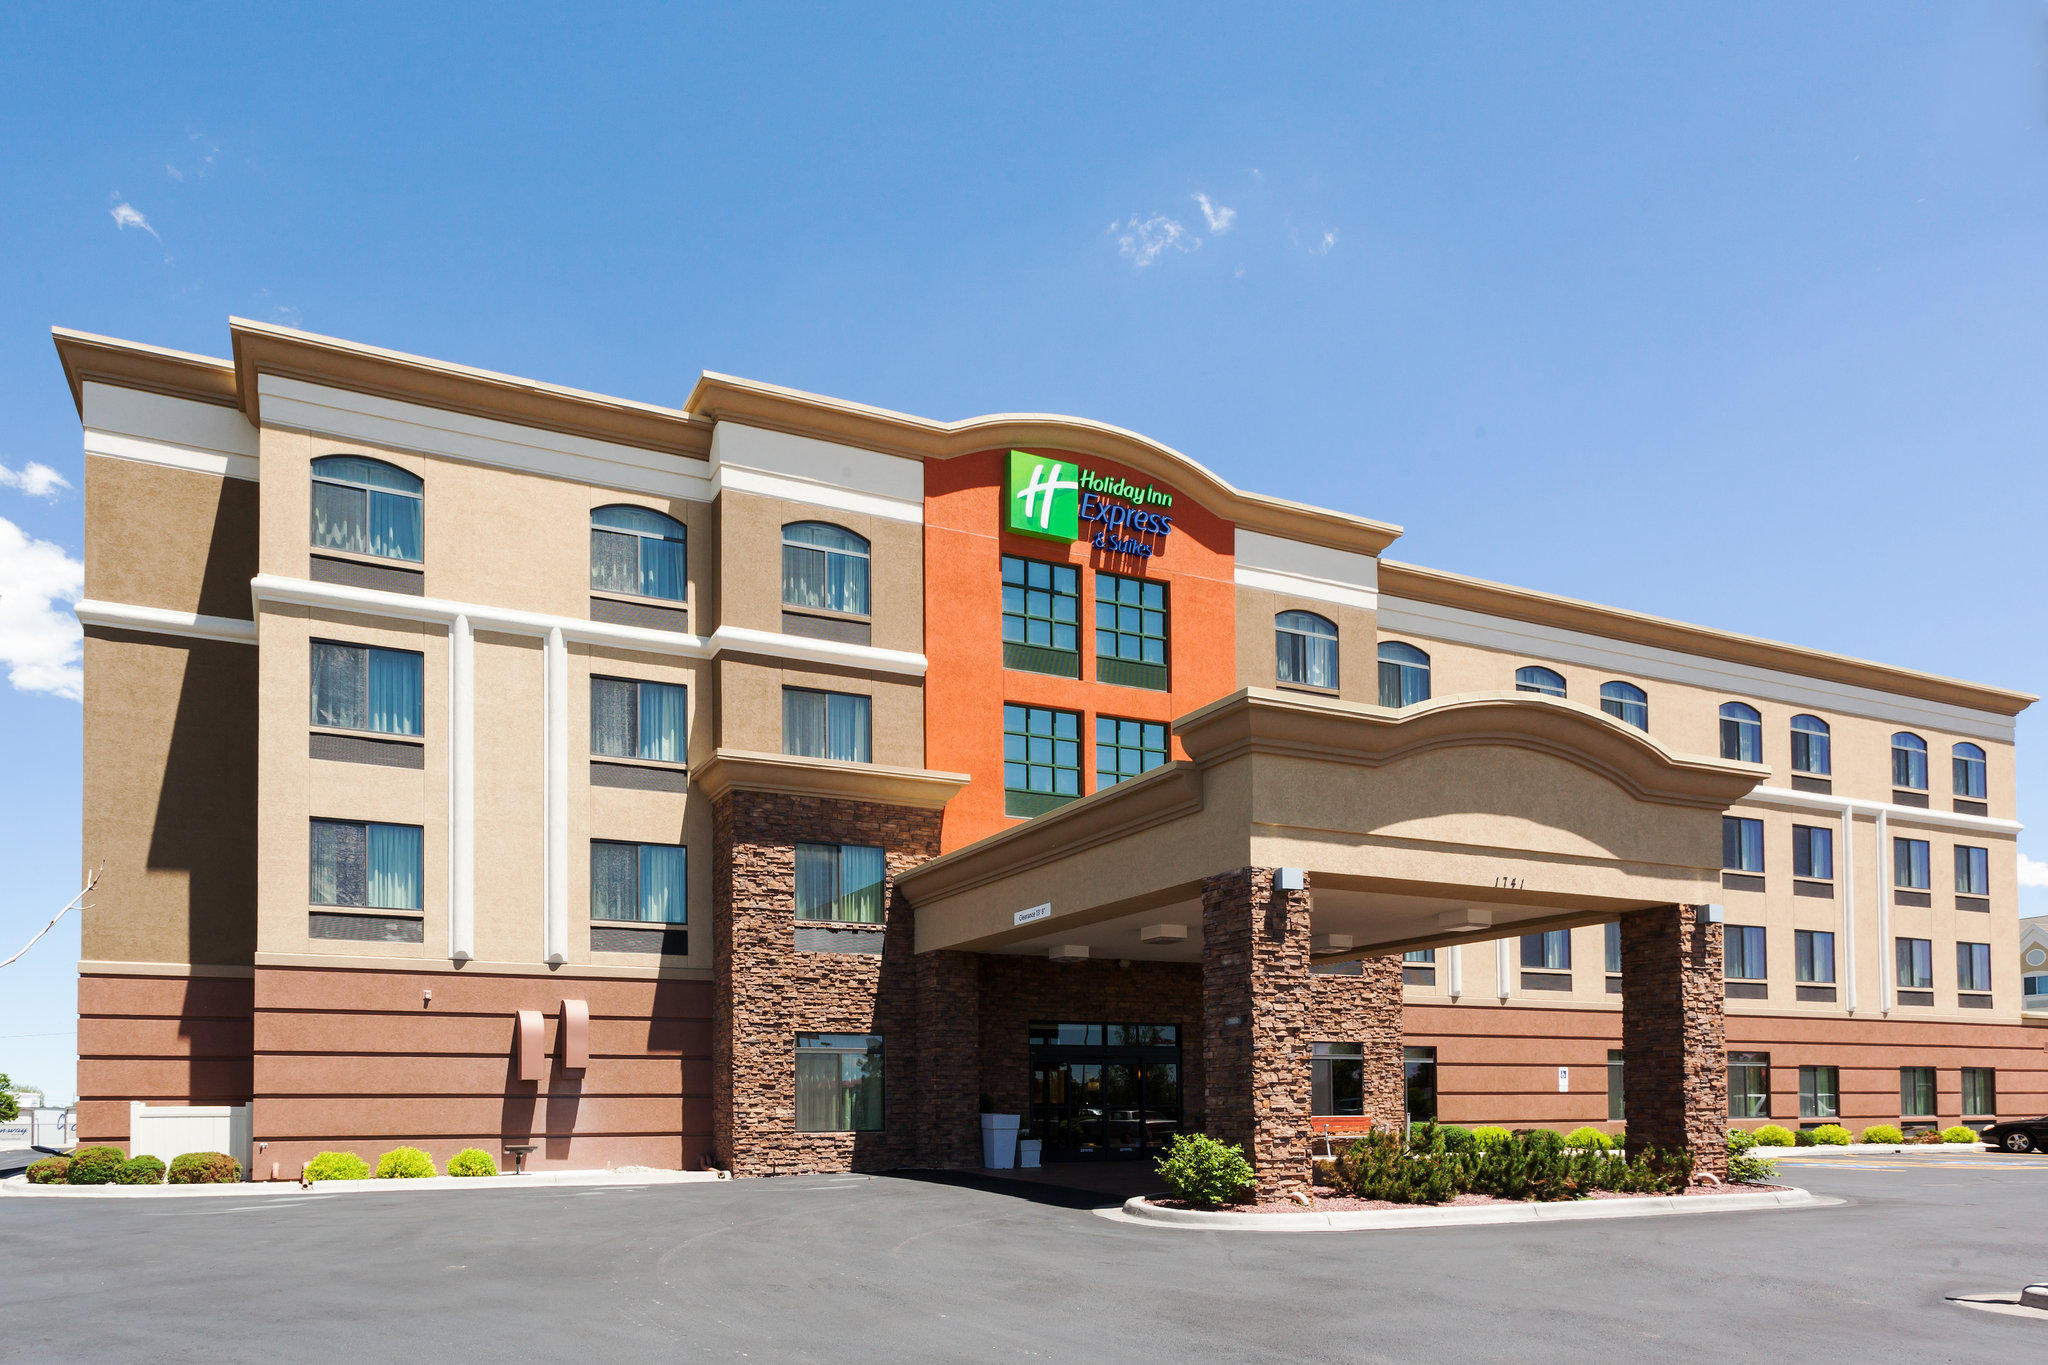 Holiday Inn Express & Suites Cheyenne Photo